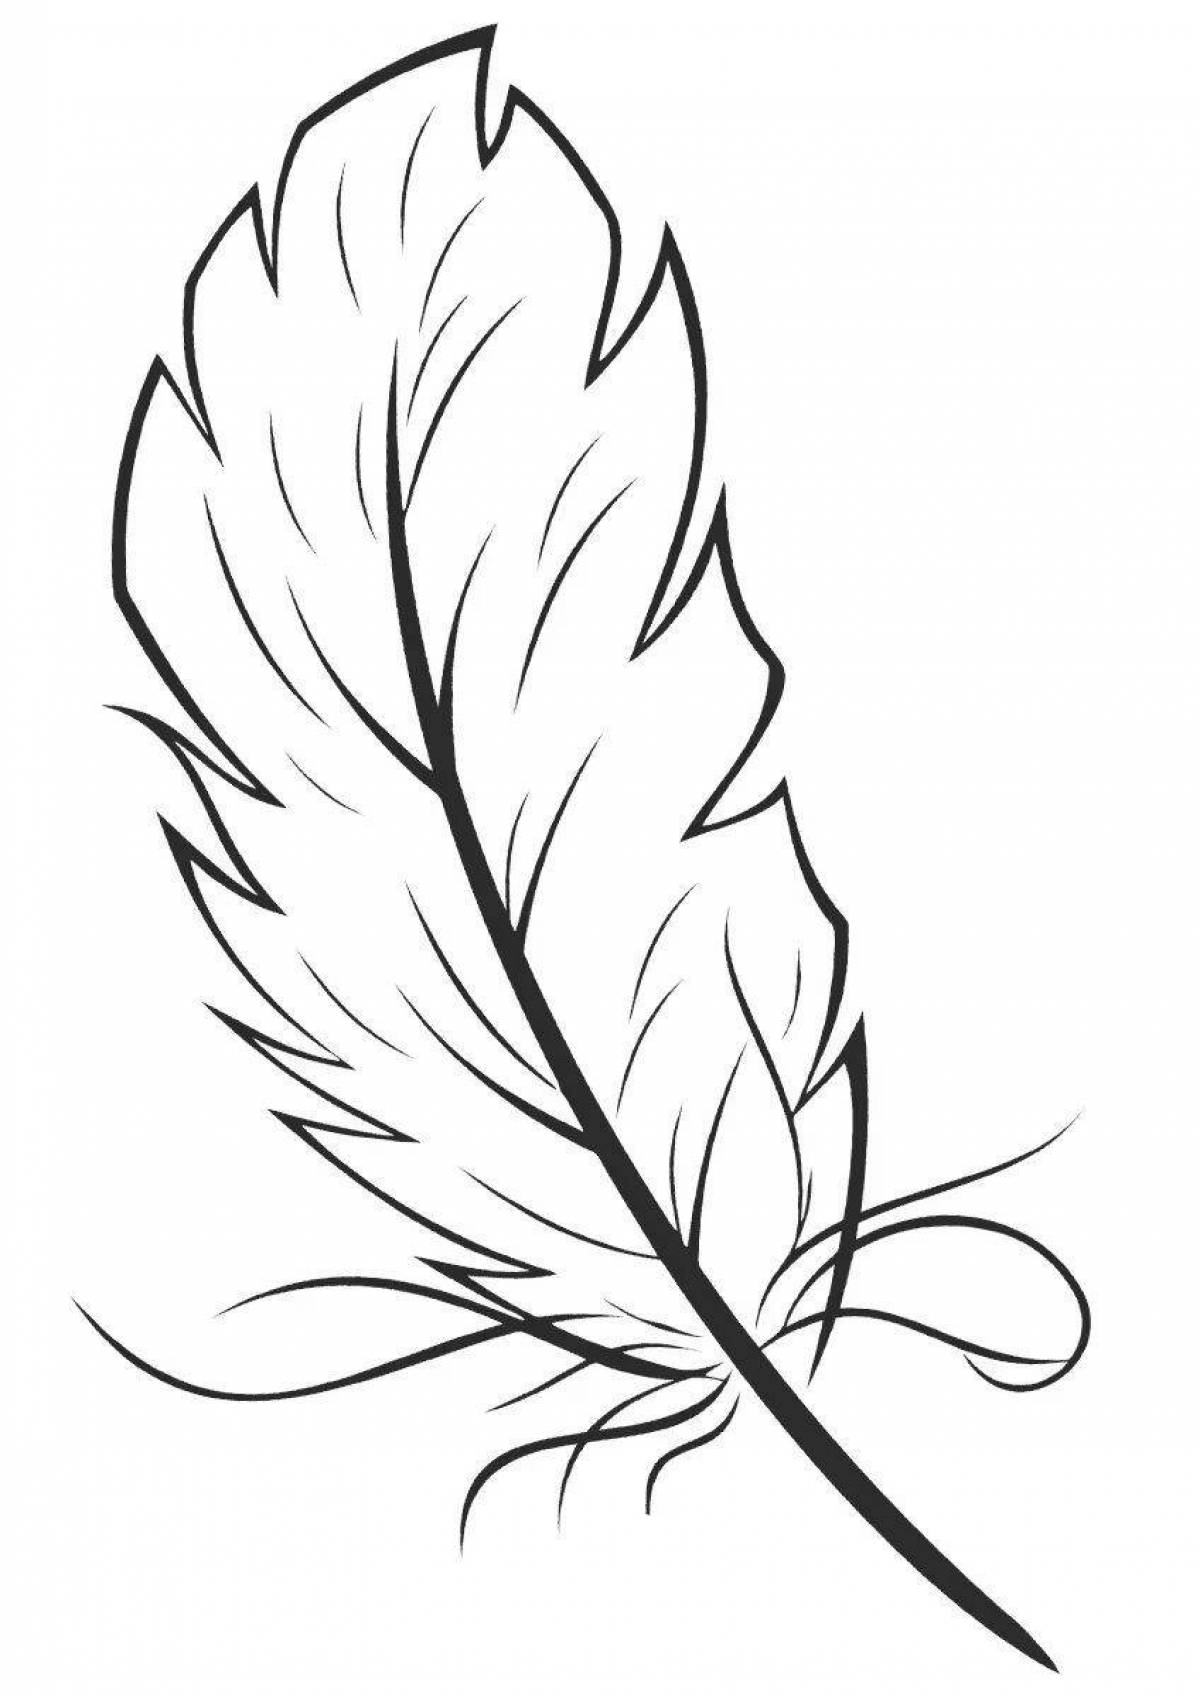 Adorable feather pattern coloring page